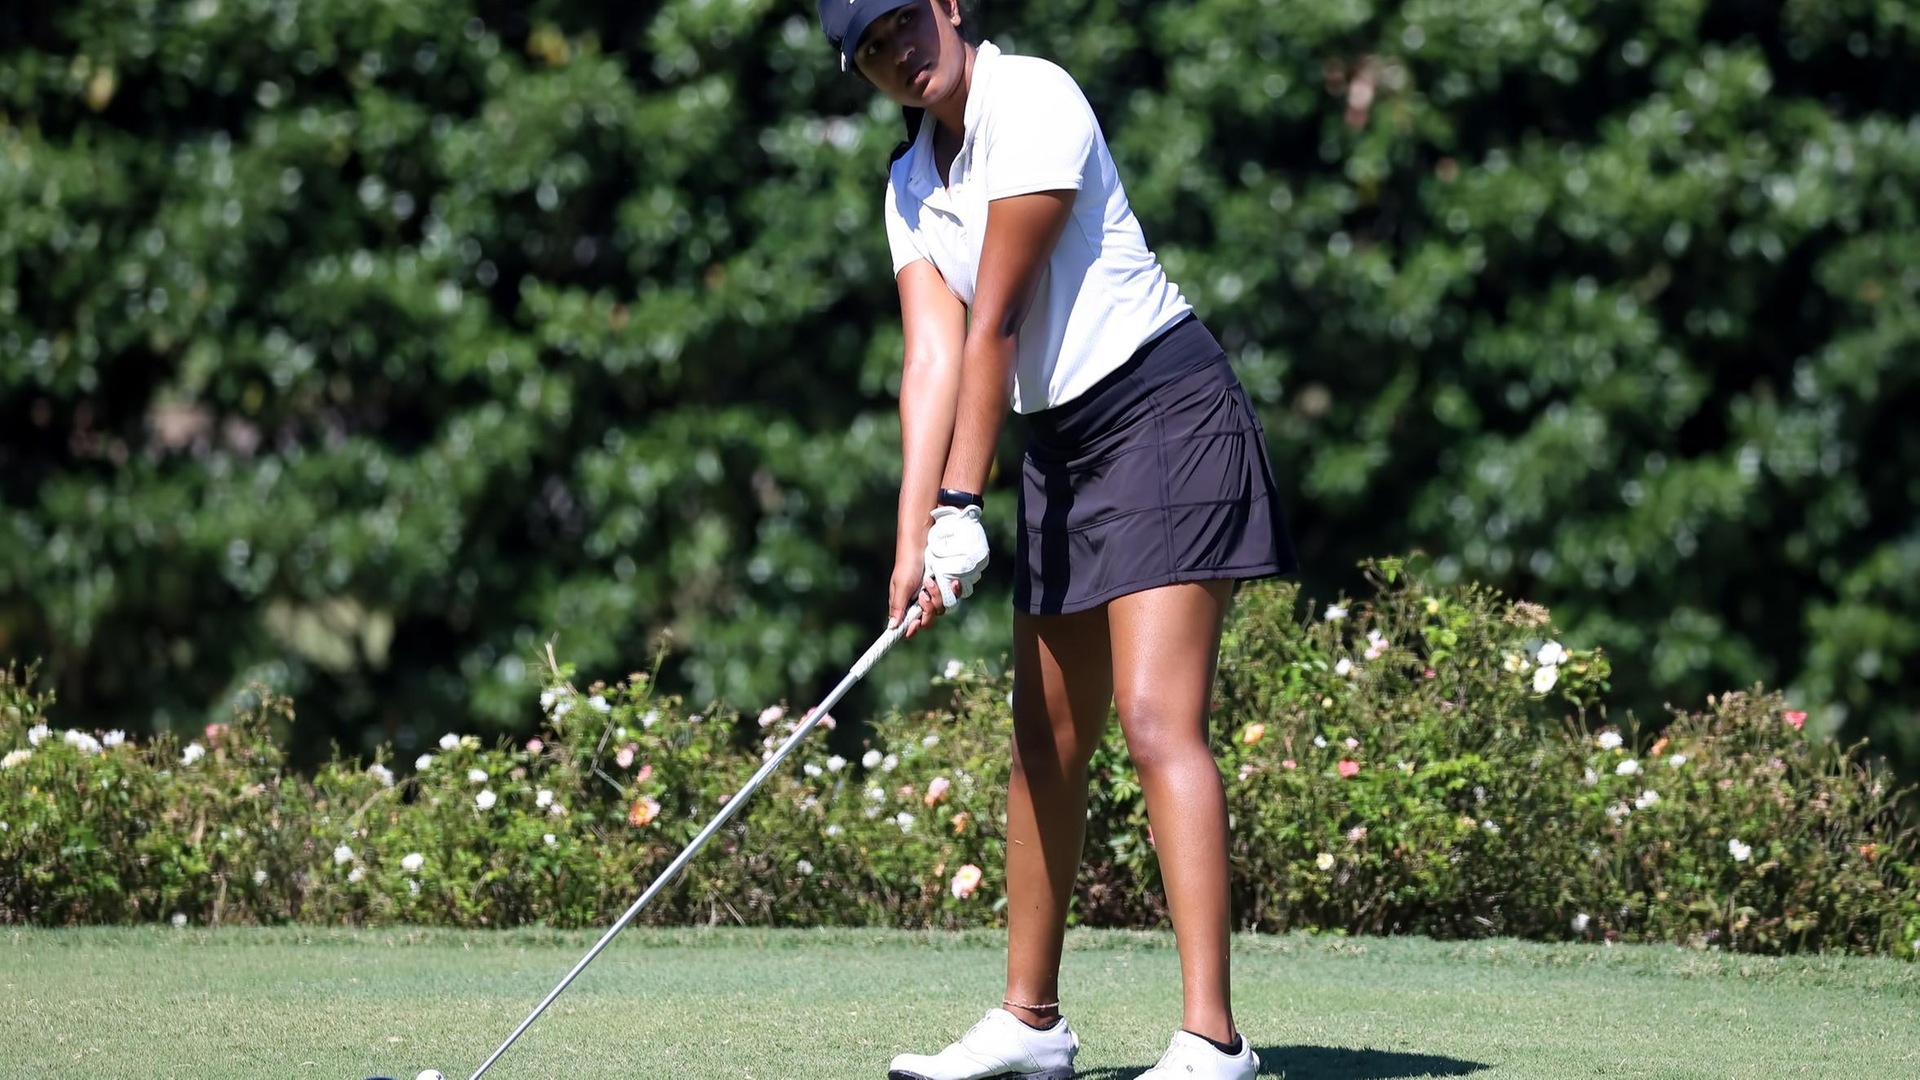 Tartans Tied for Fourth at Jekyll Island Collegiate